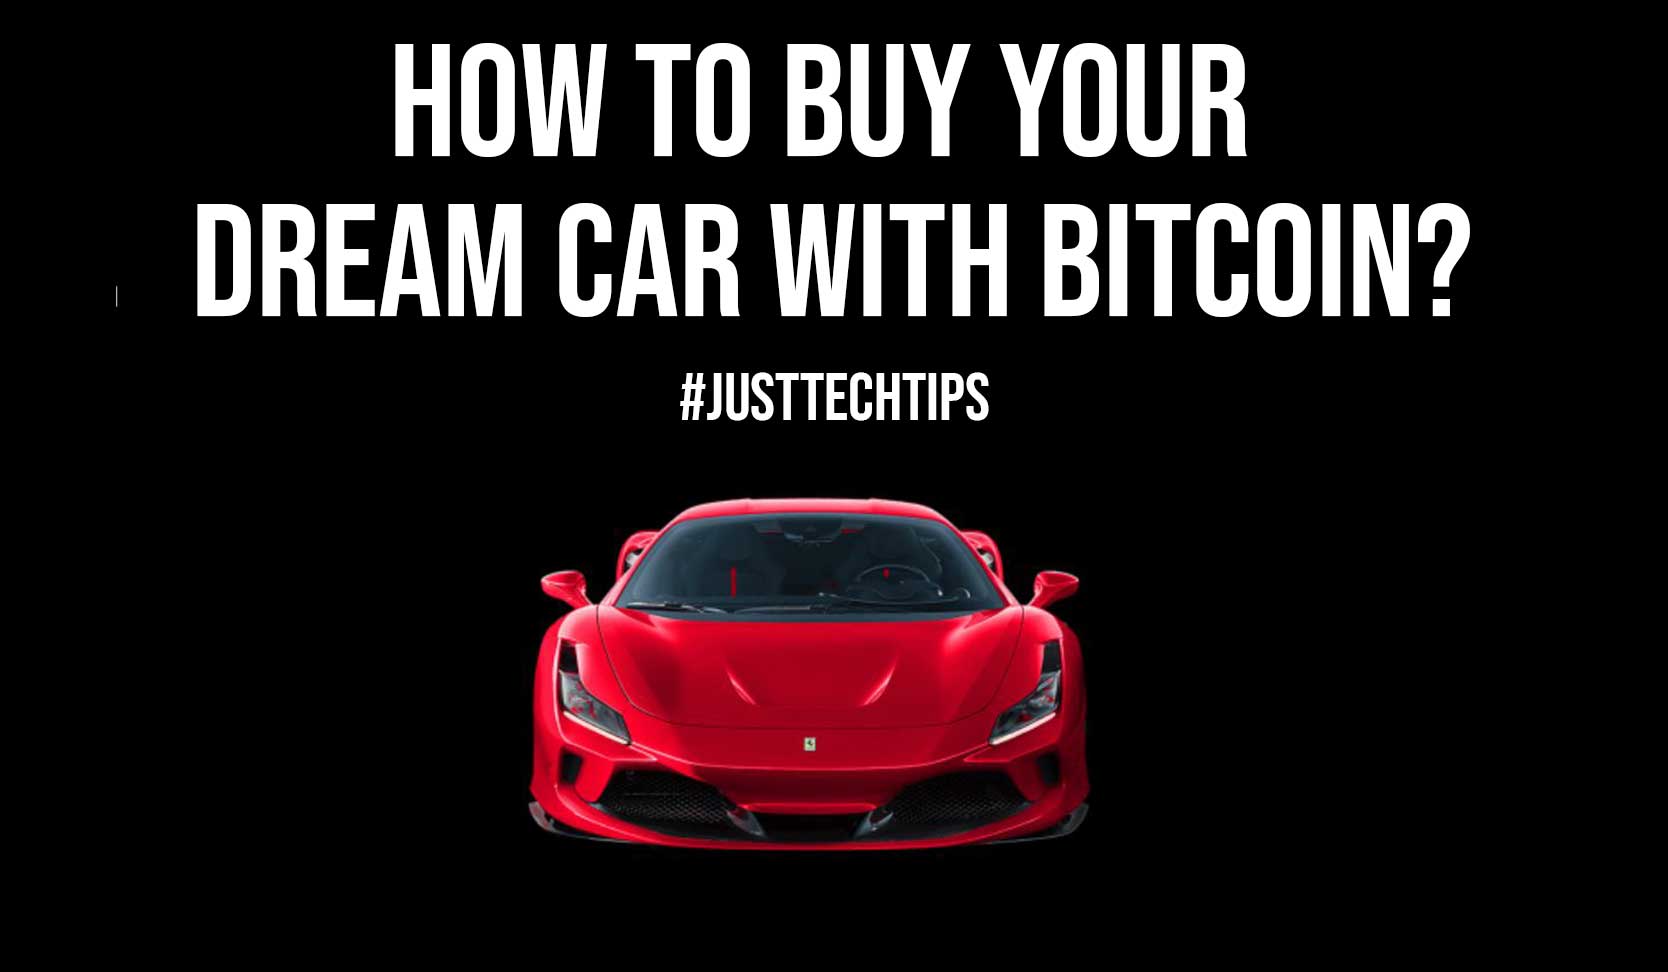 How to Buy Your Dream Car with Bitcoin